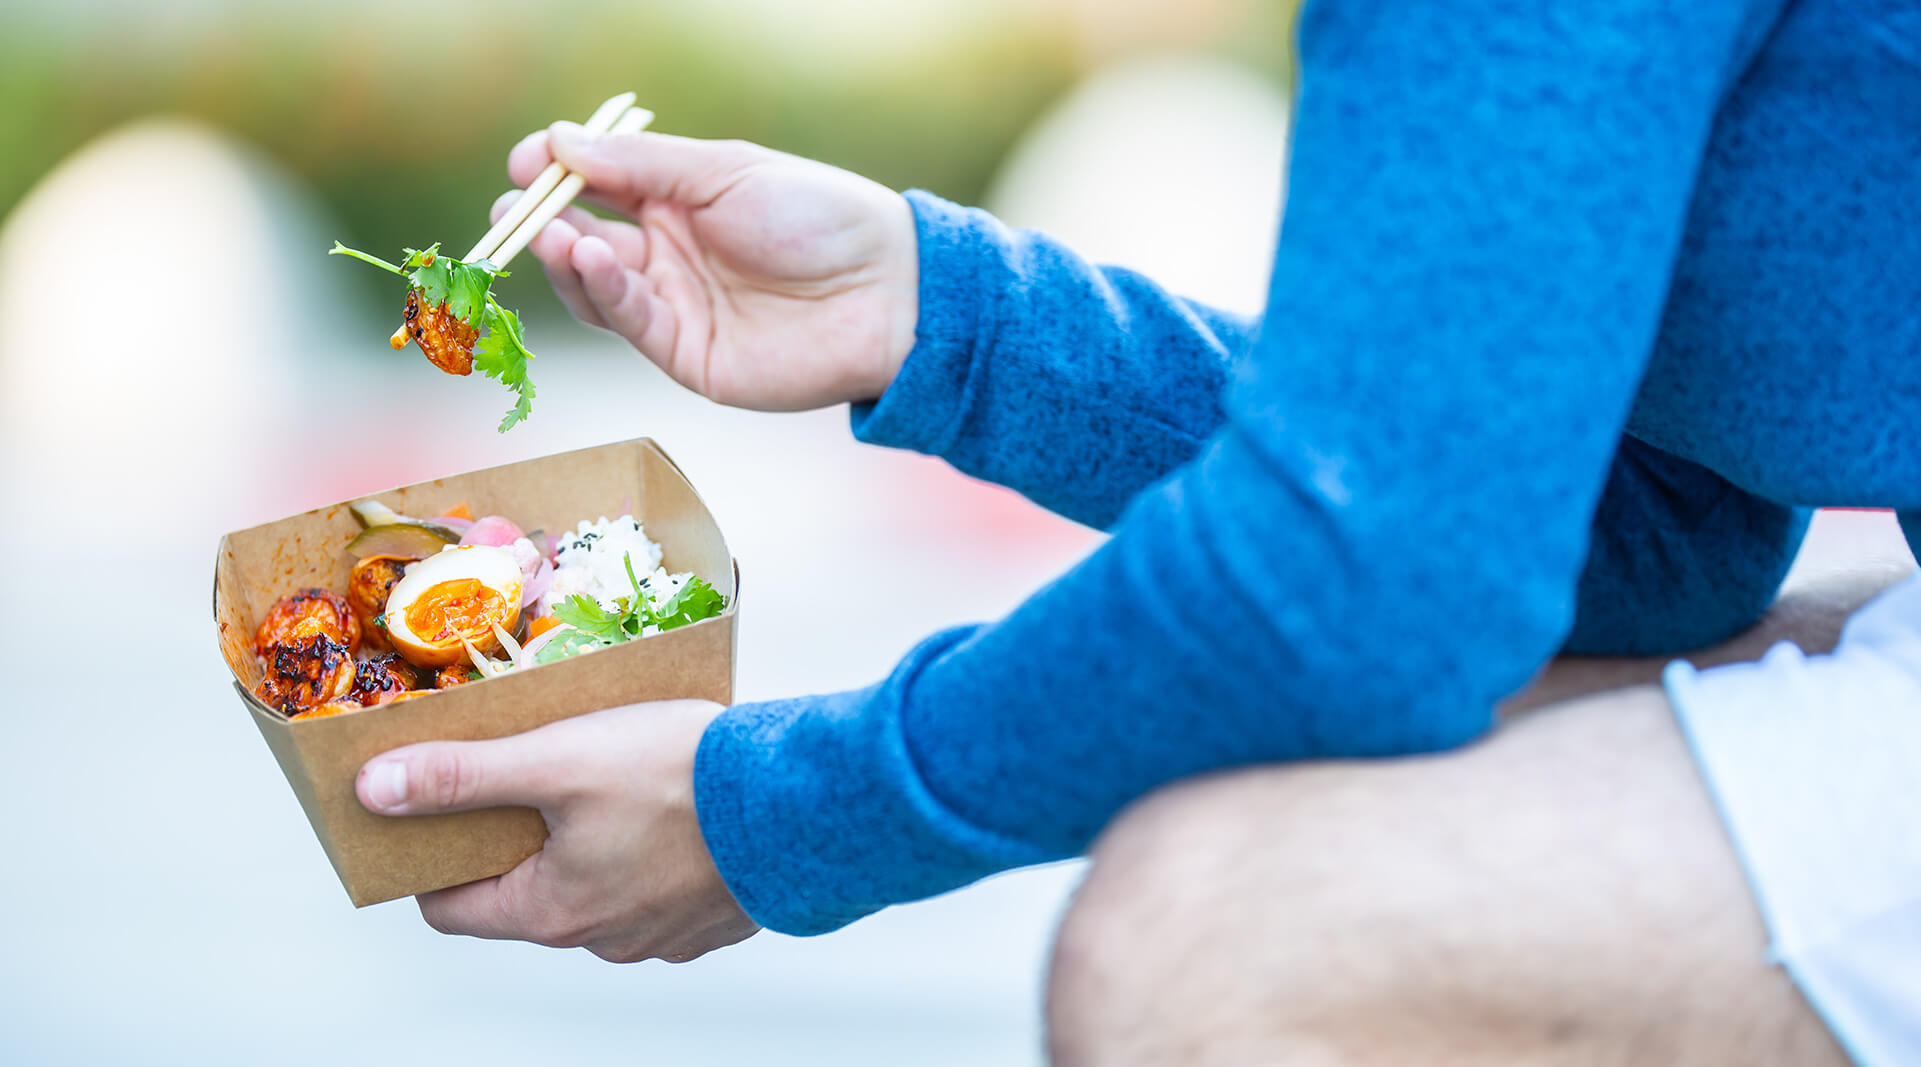 Person eating food out of a take-out container